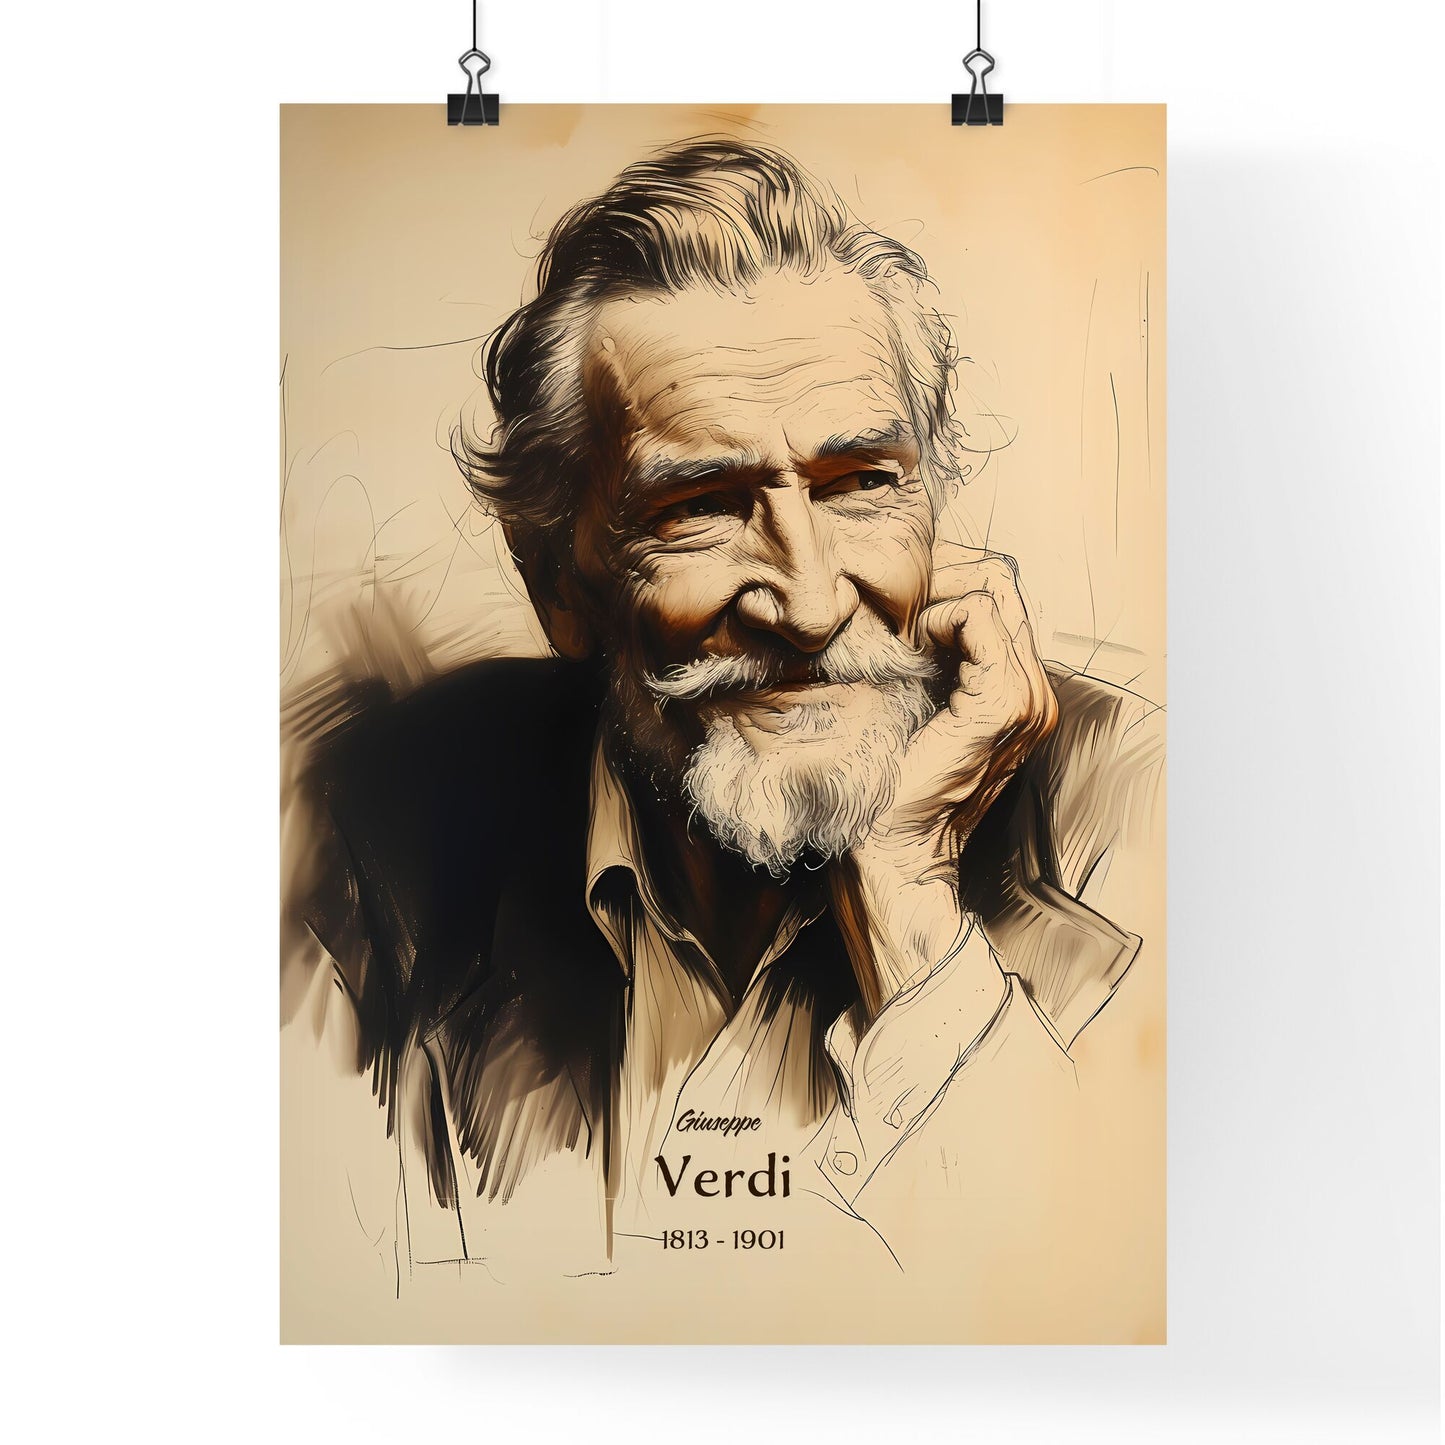 Giuseppe, Verdi, 1813 - 1901, A Poster of a drawing of a man with a beard Default Title